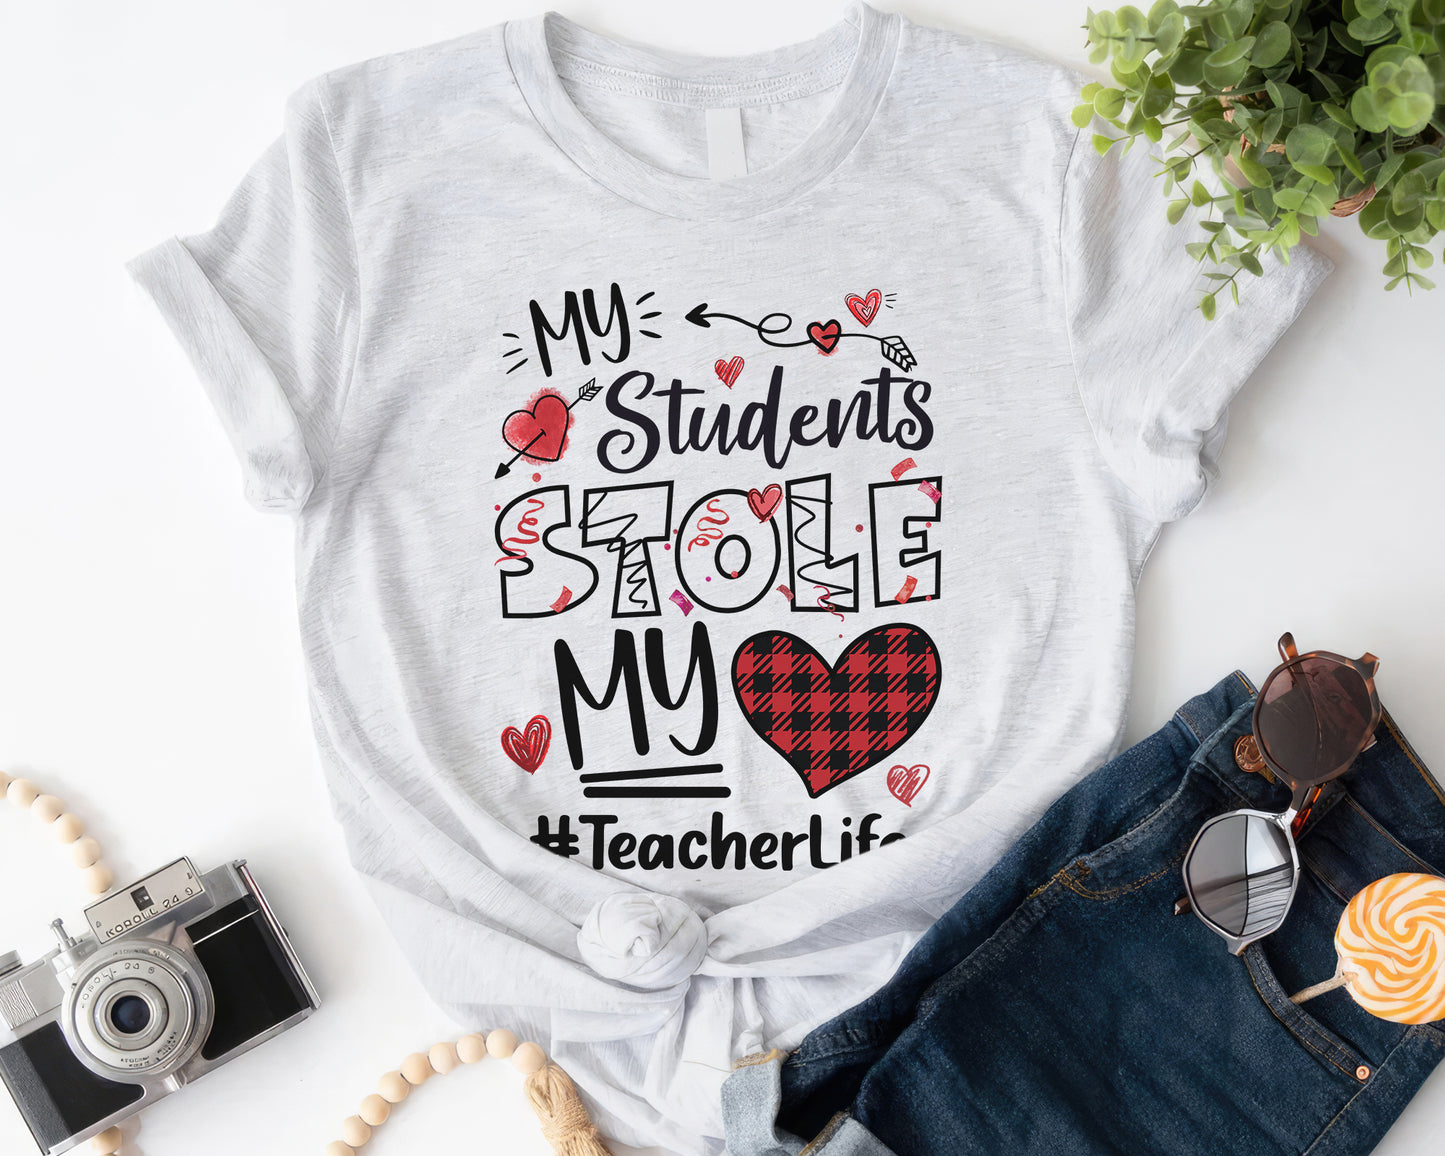 Tee Art Online Valentine My Students Stole My Heart Personalized Classic Unisex Tee | Valentine's Day Kawaii Cute T-shirts | Education Teacher Design- ash